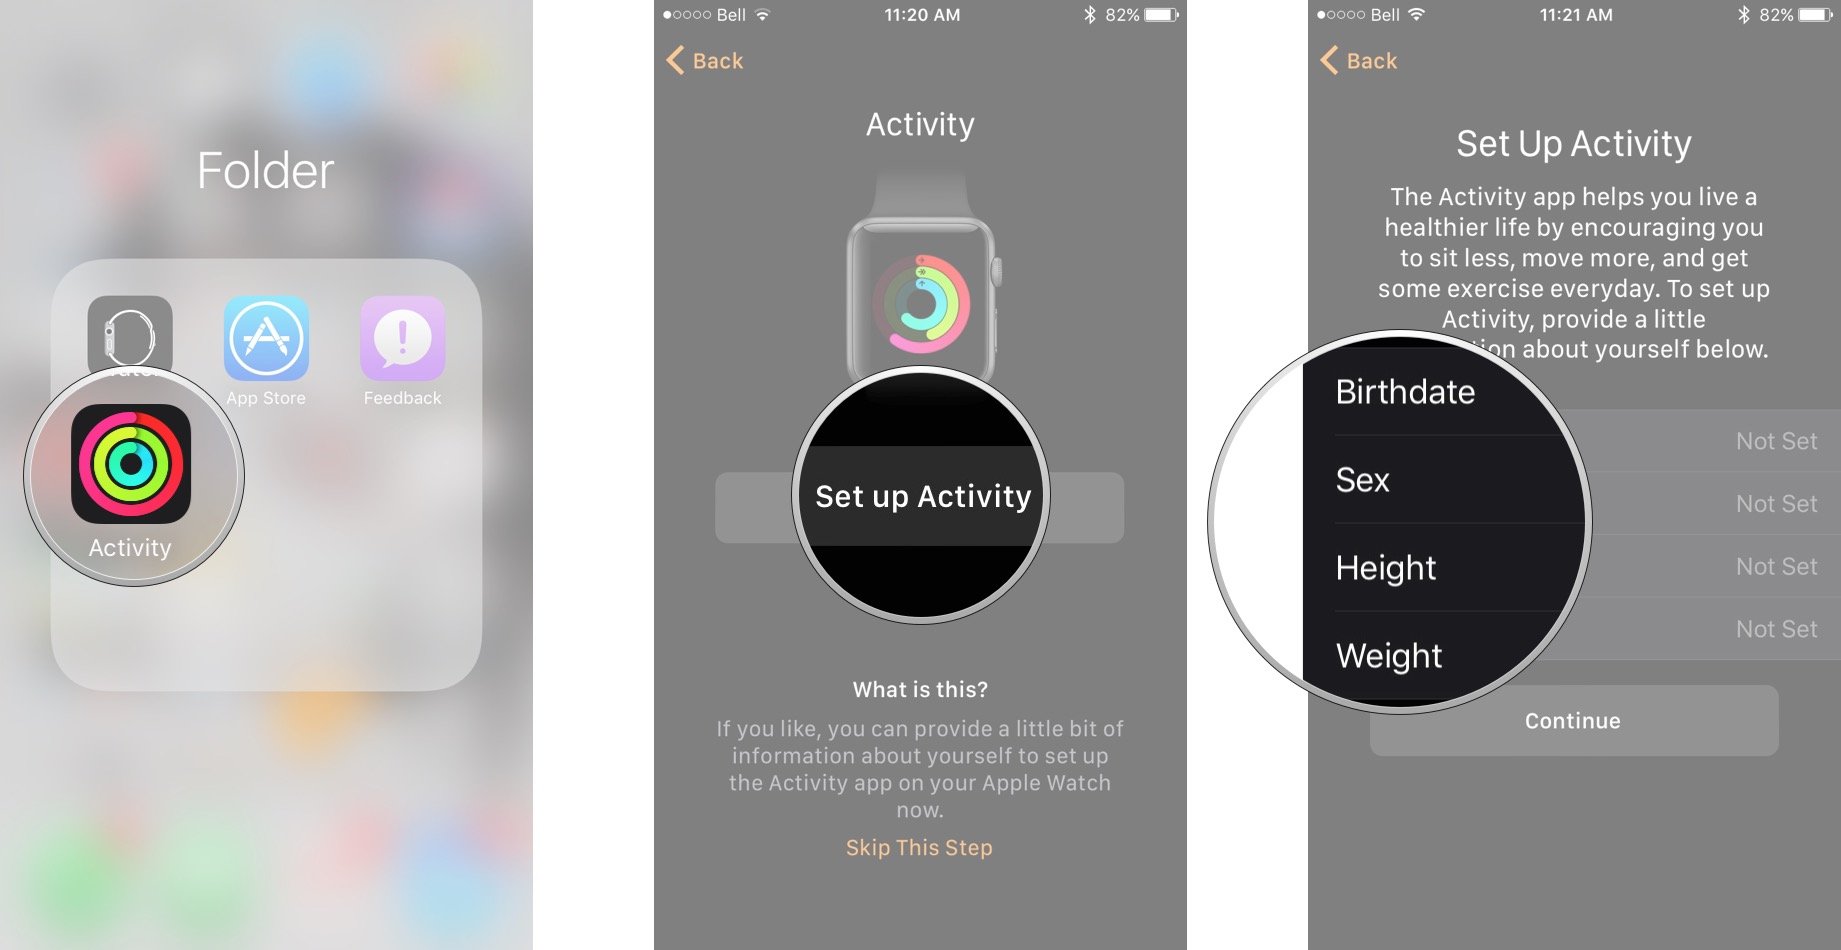 Launch the Activities app, tap set up activity and enter your personal information.